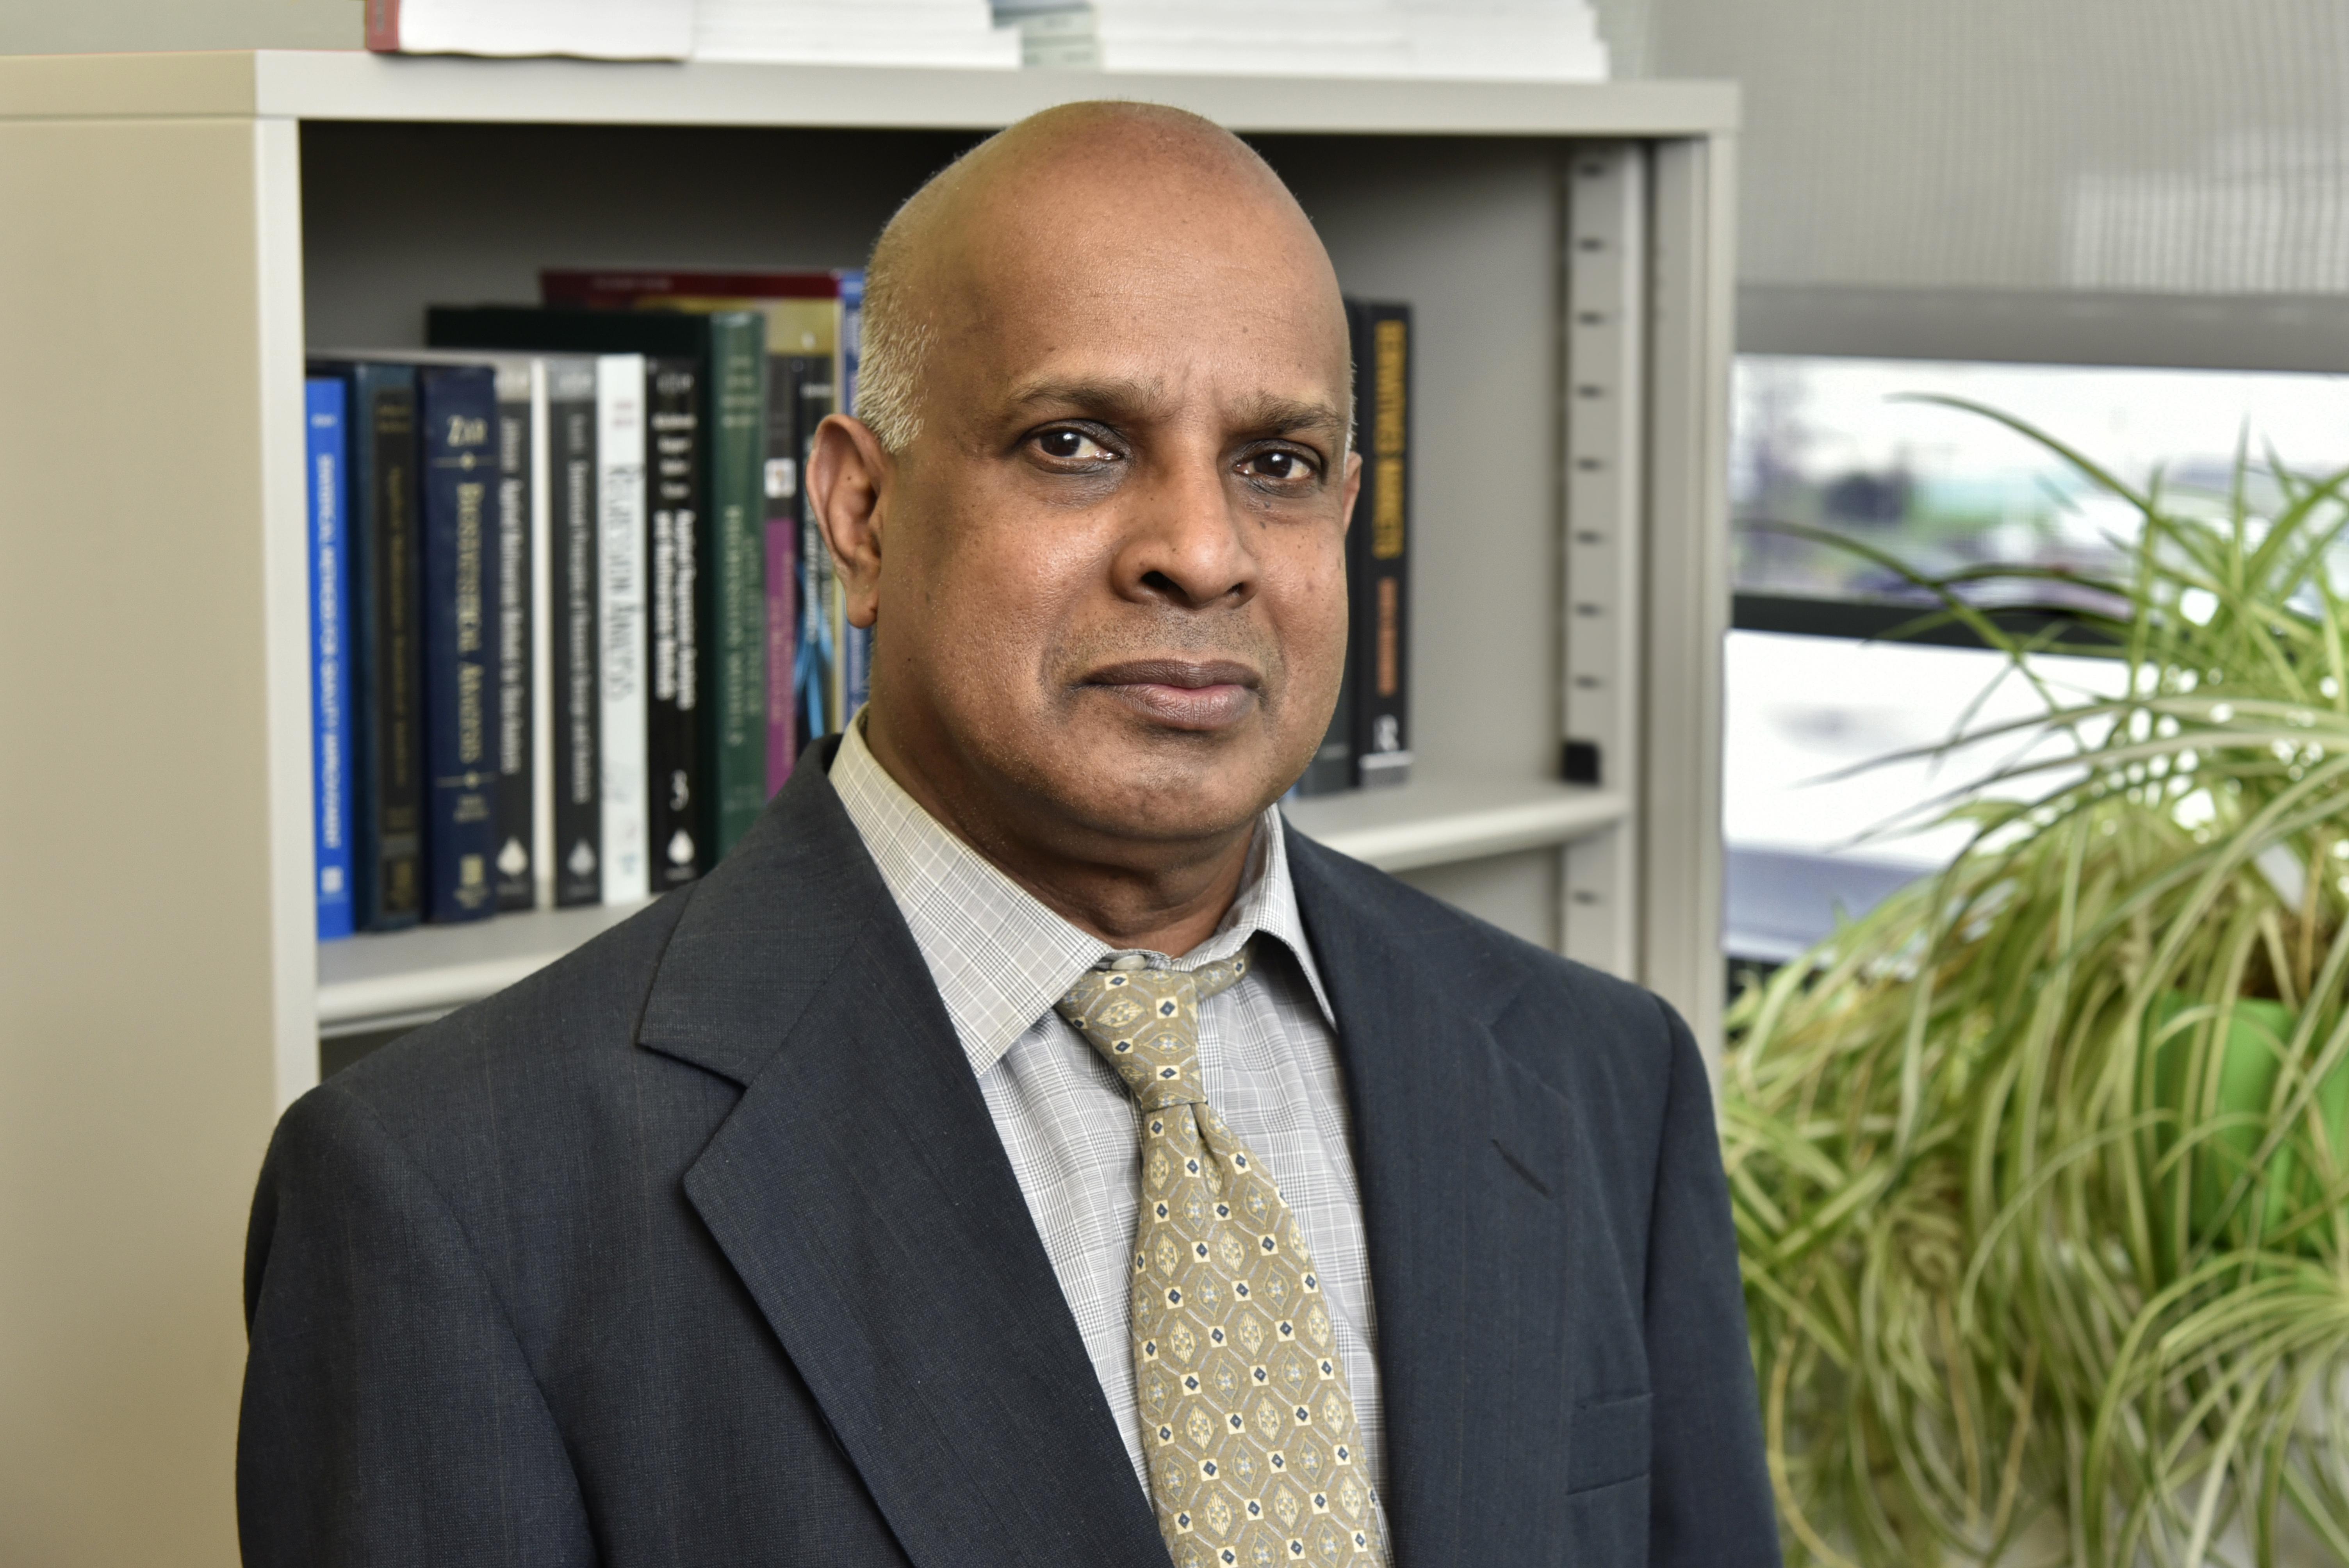 Outstanding work inside the classroom and supporting student research have earned Ampalavanar Nanthakumar of SUNY Oswego’s Mathematics Department the rank of SUNY Distinguished Teaching Professor